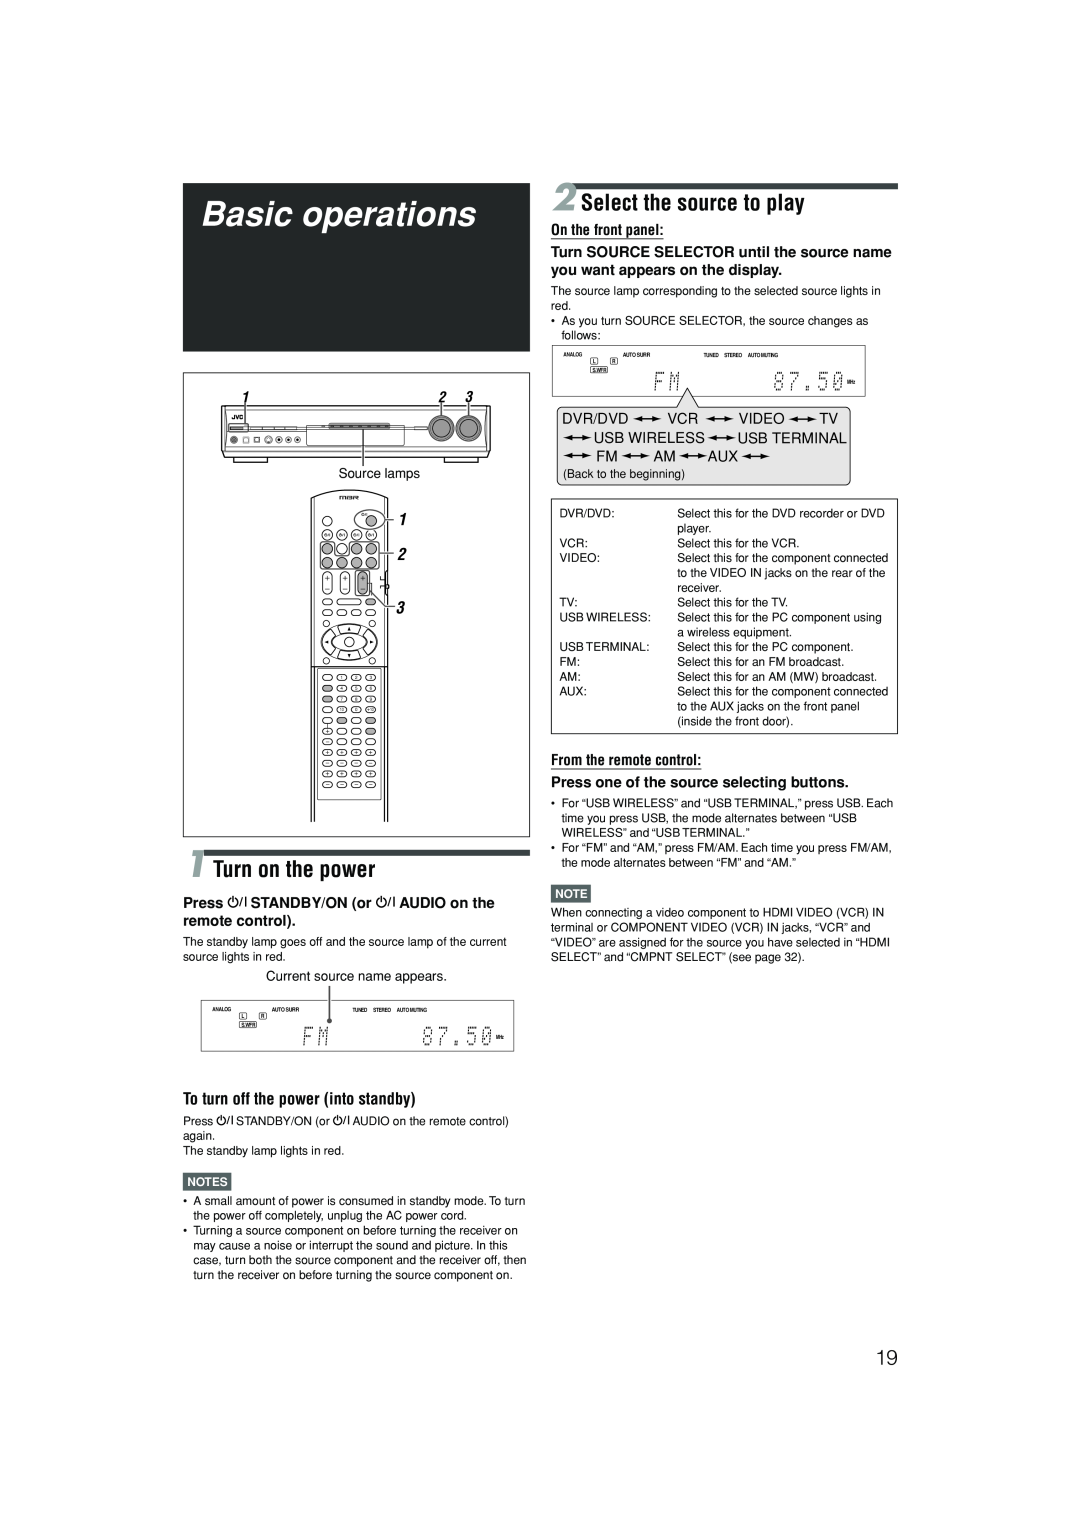 JVC LVT1437-001A manual Basic operations, Turn on the power, Select the source to play, To turn off the power into standby 